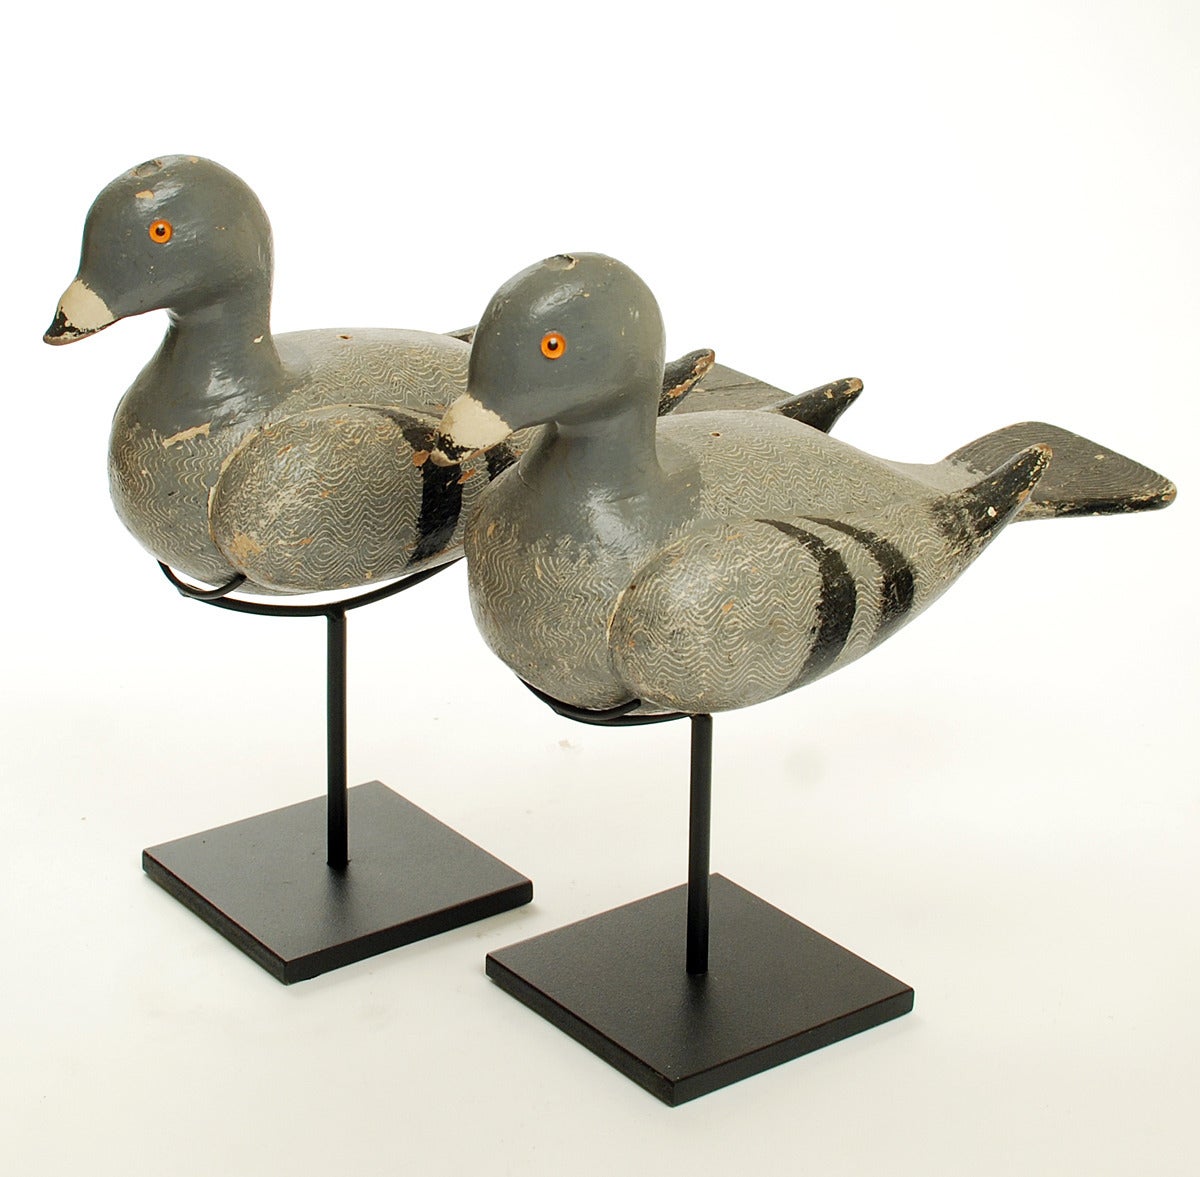 A pair of rare early 20th century pigeon decoys - circa 1900. hand carved and polychrome painted wood with inset glass eyes. Each decoy displayed on a high quality custom made stand. 

Dimensions: each decoy measures approximately 11 inches long x